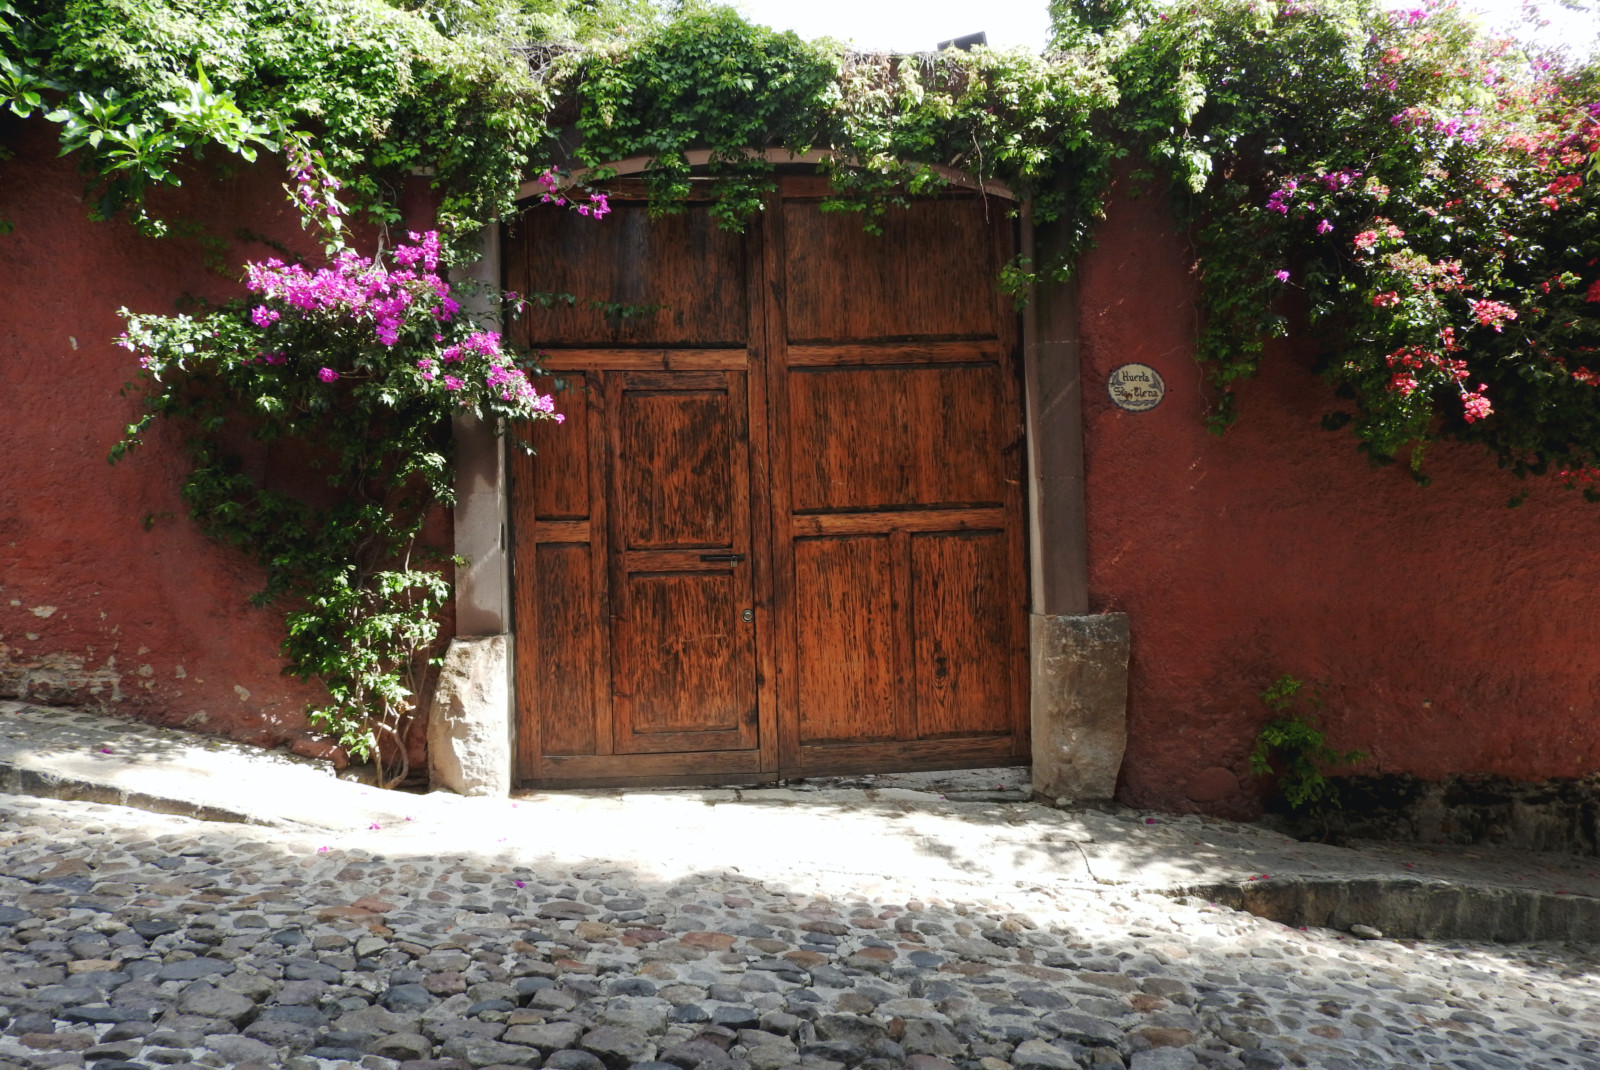 Wooden door covered in plants and purple flowers on cobblestone street